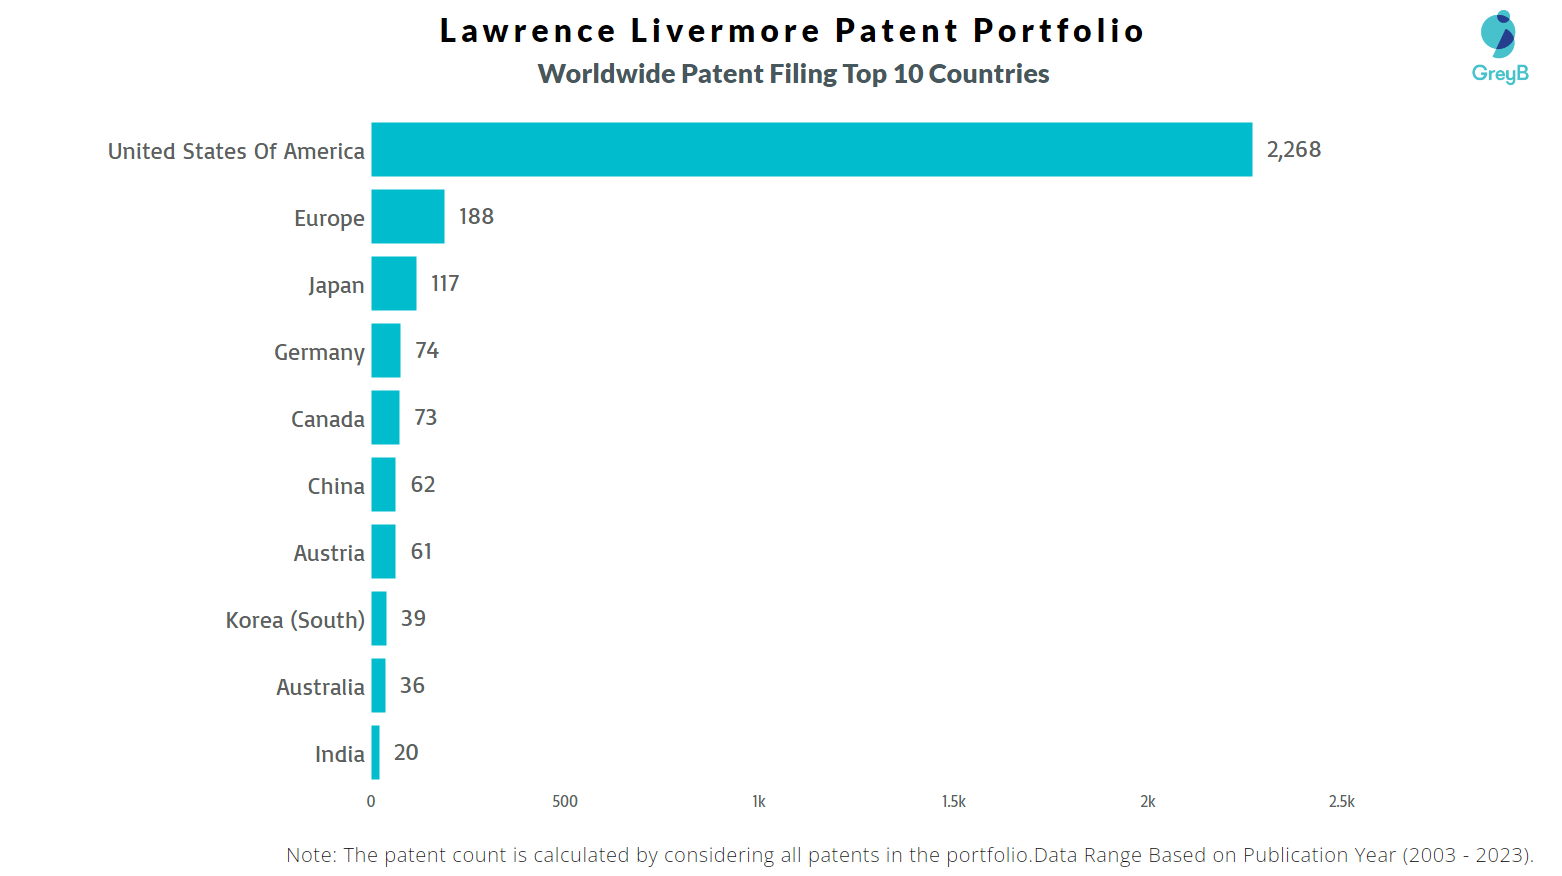 Lawrence Livermore Worldwide Patent Filing